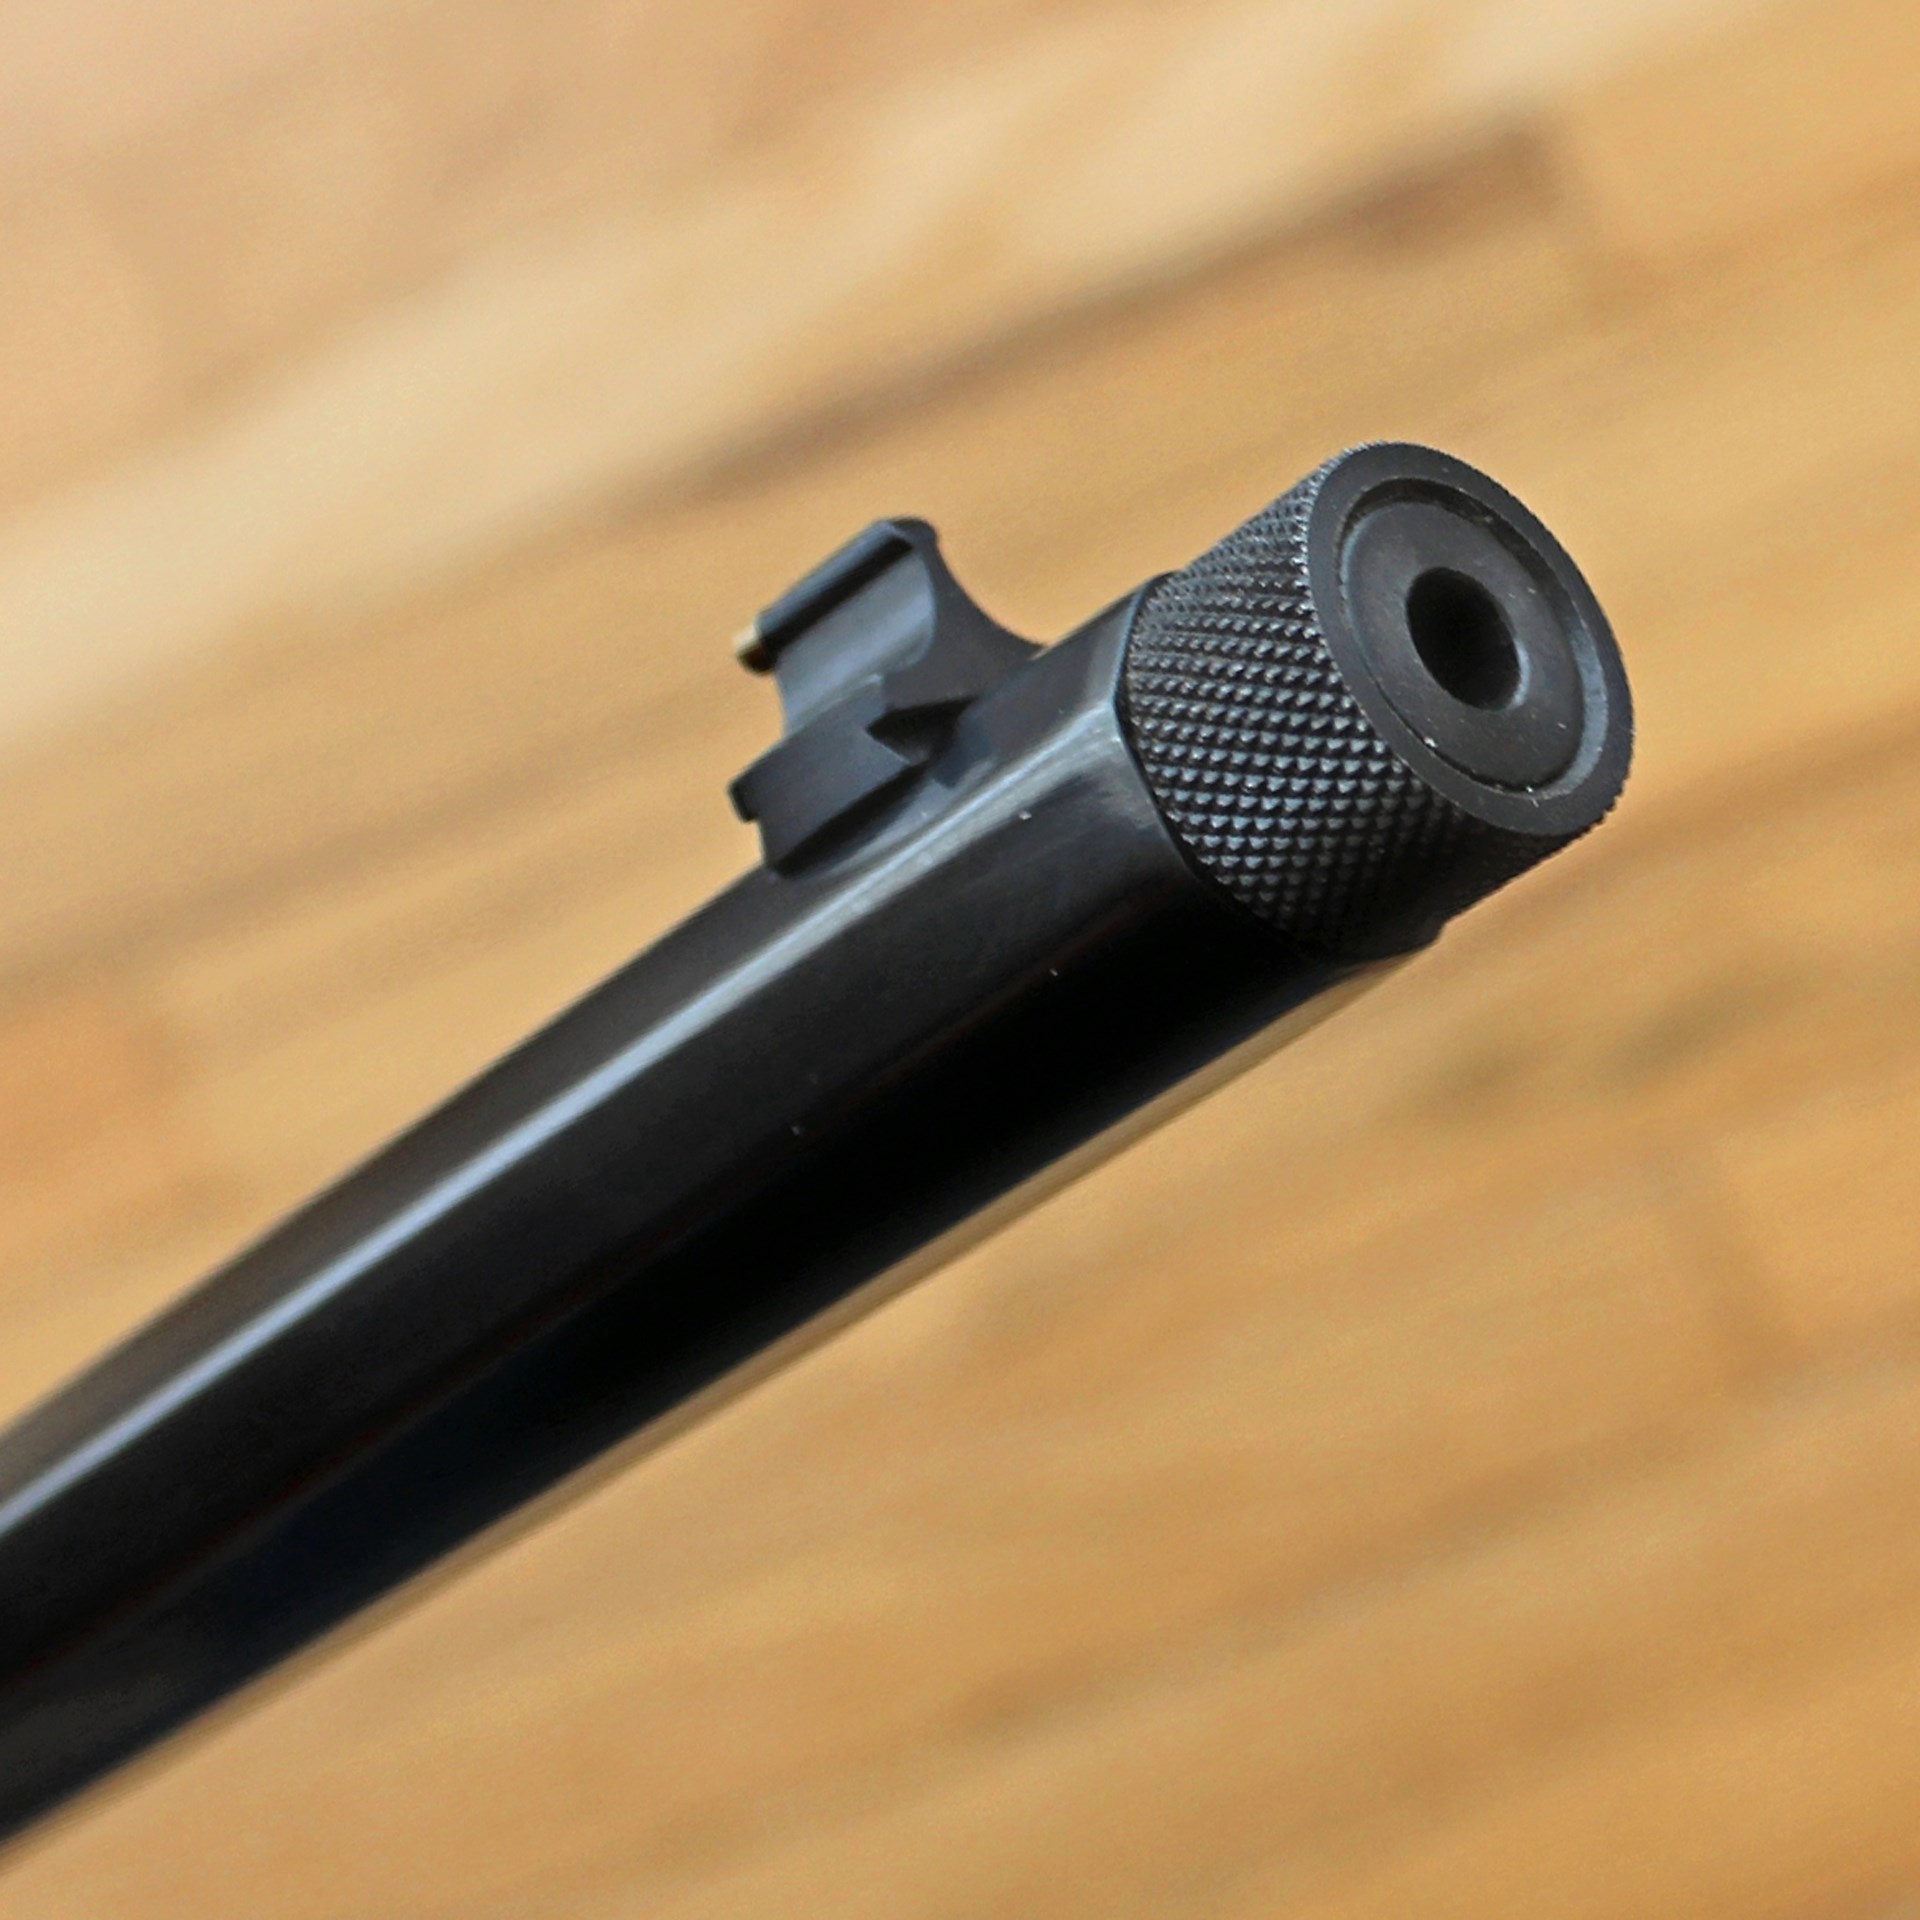 Henry H001 lever-action barrel threaded 1/2x28 TPI for muzzle brakes, compensators and, in this case, sound suppressors.